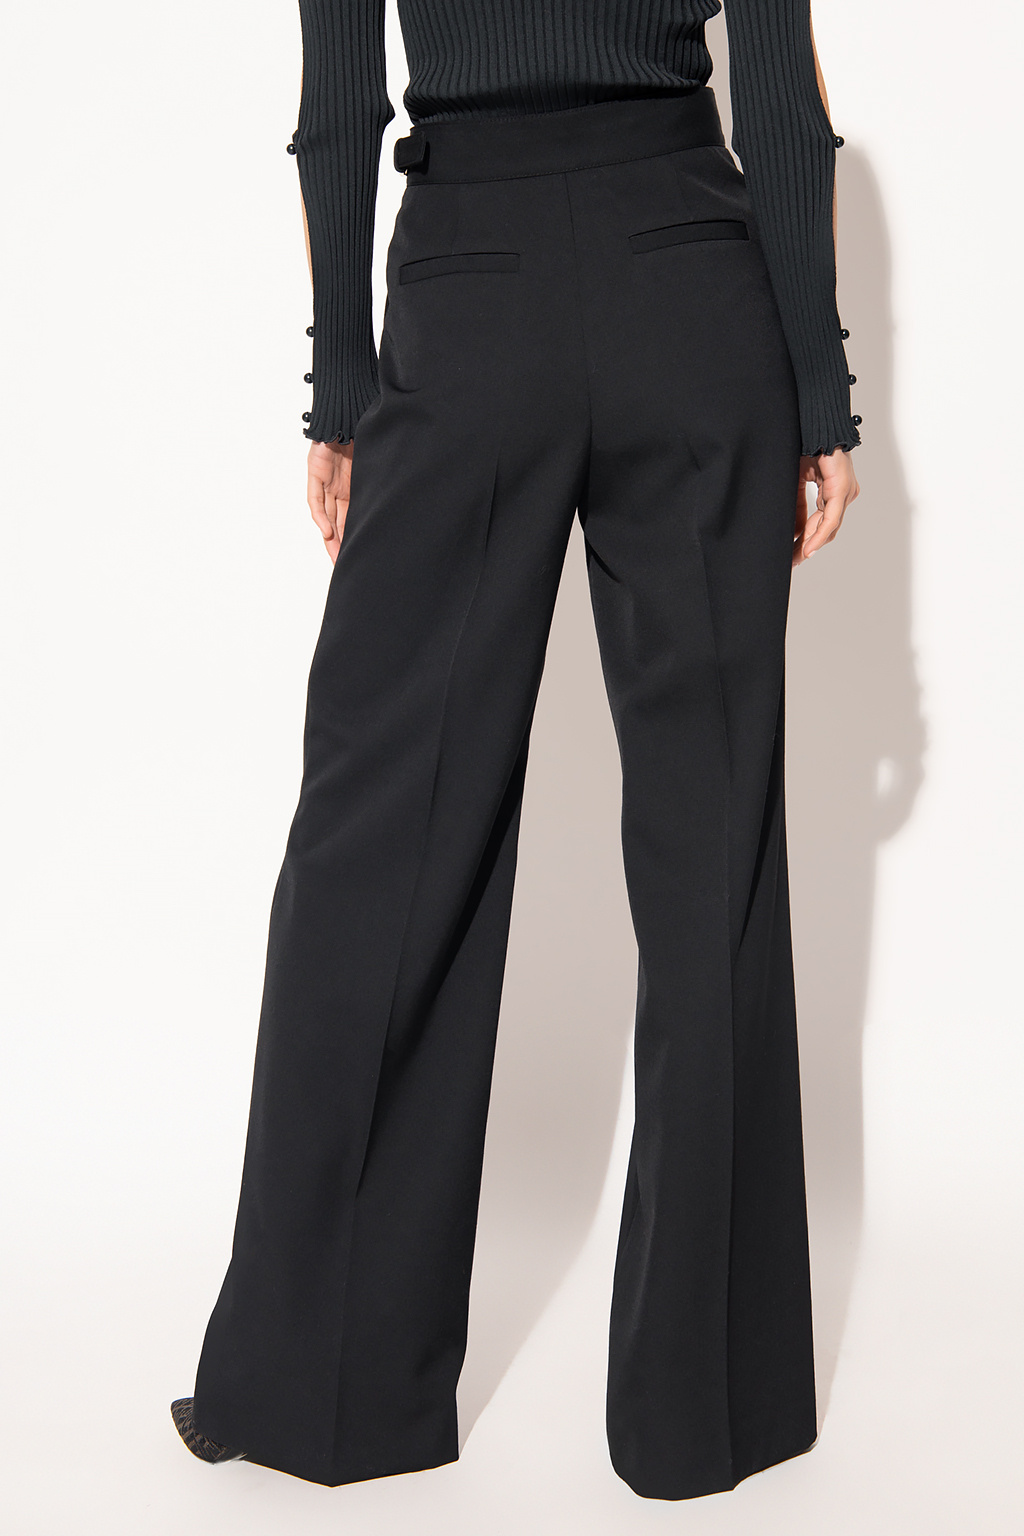 Red Valentino Wide-legged trousers